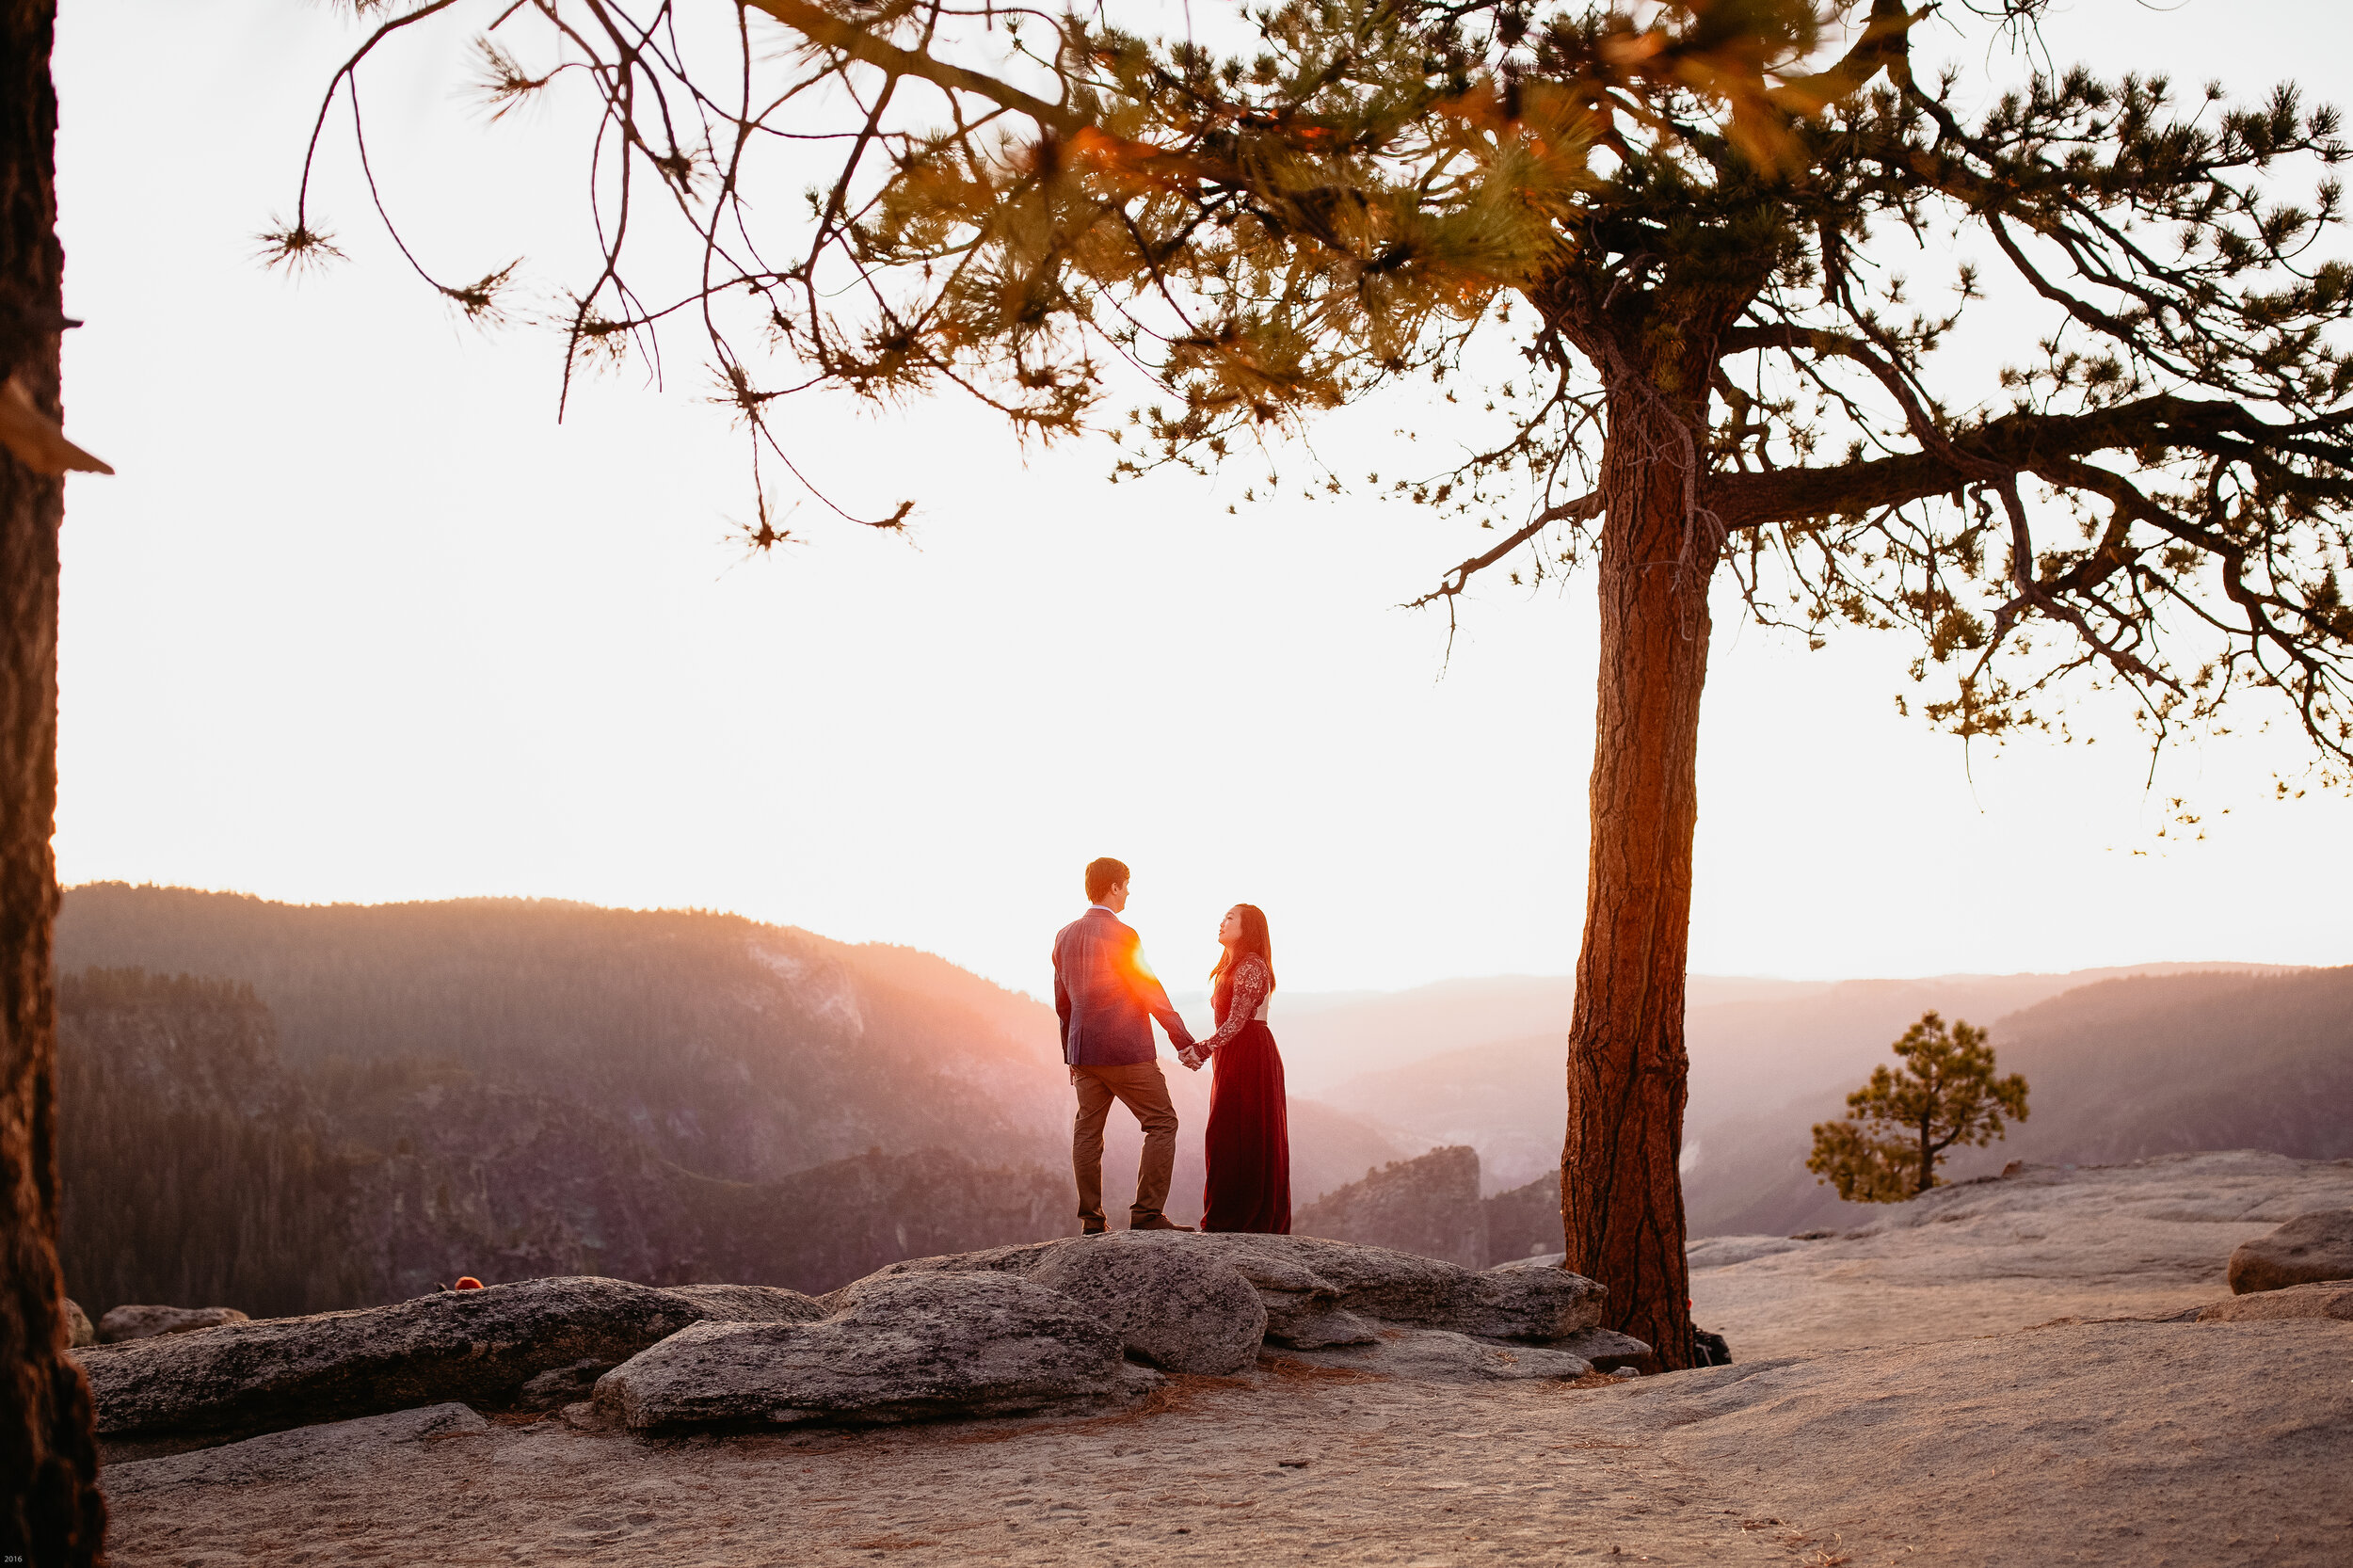 yosemite-national-park-couples-session-at-taft-point-and-yosemite-valley-yosemite-elopement-photographer-nicole-daacke-photography-167.jpg